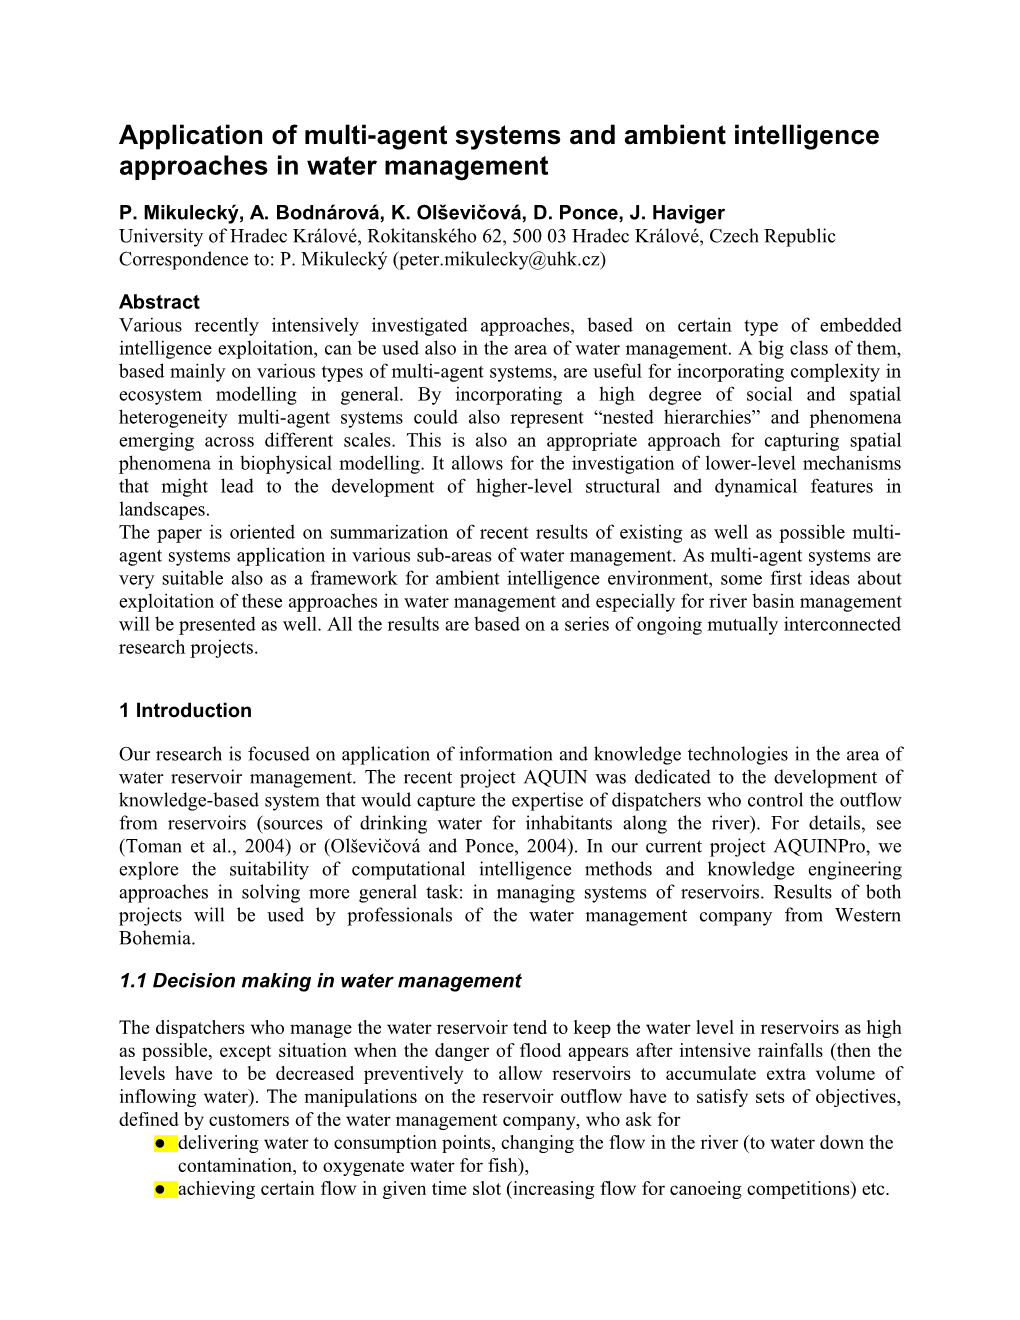 Application of Multi-Agent Systems and Ambient Intelligence Approaches in Water Management